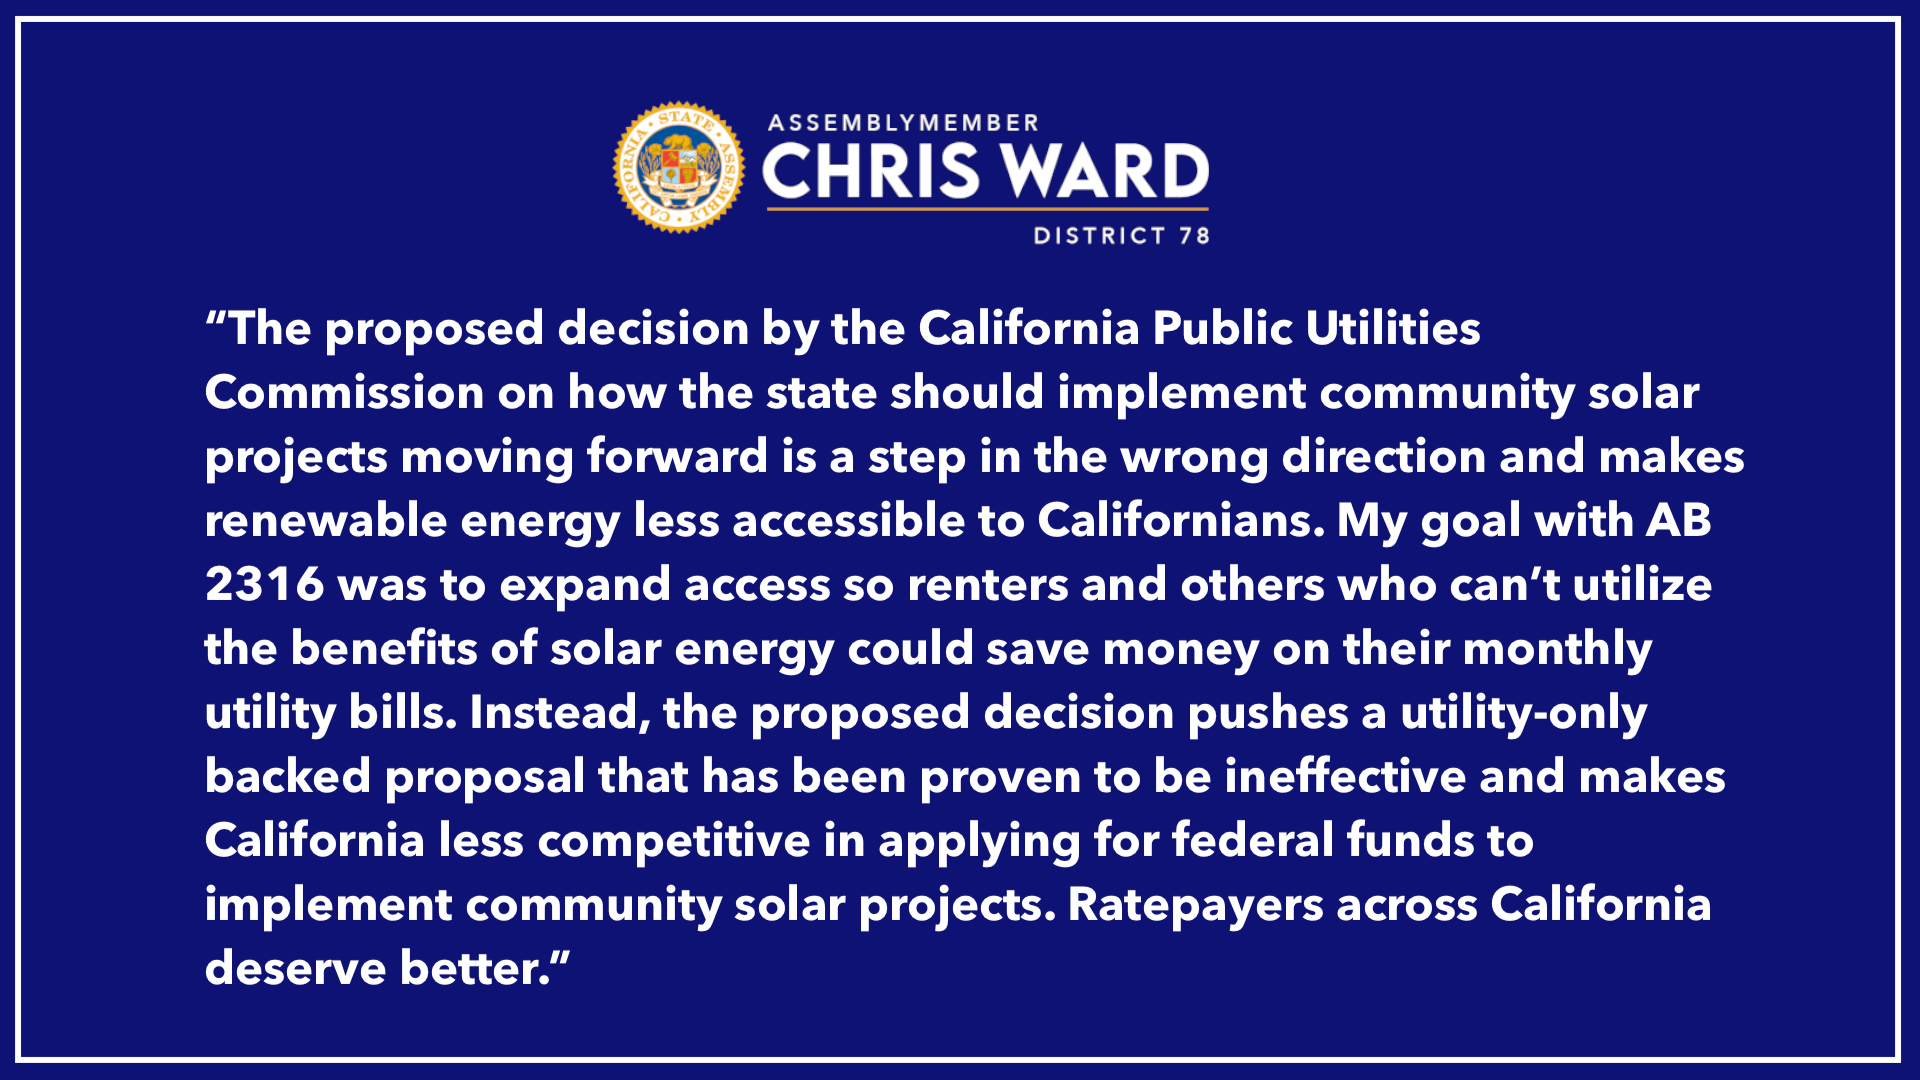 Statement on CPUC decision on community solar projects